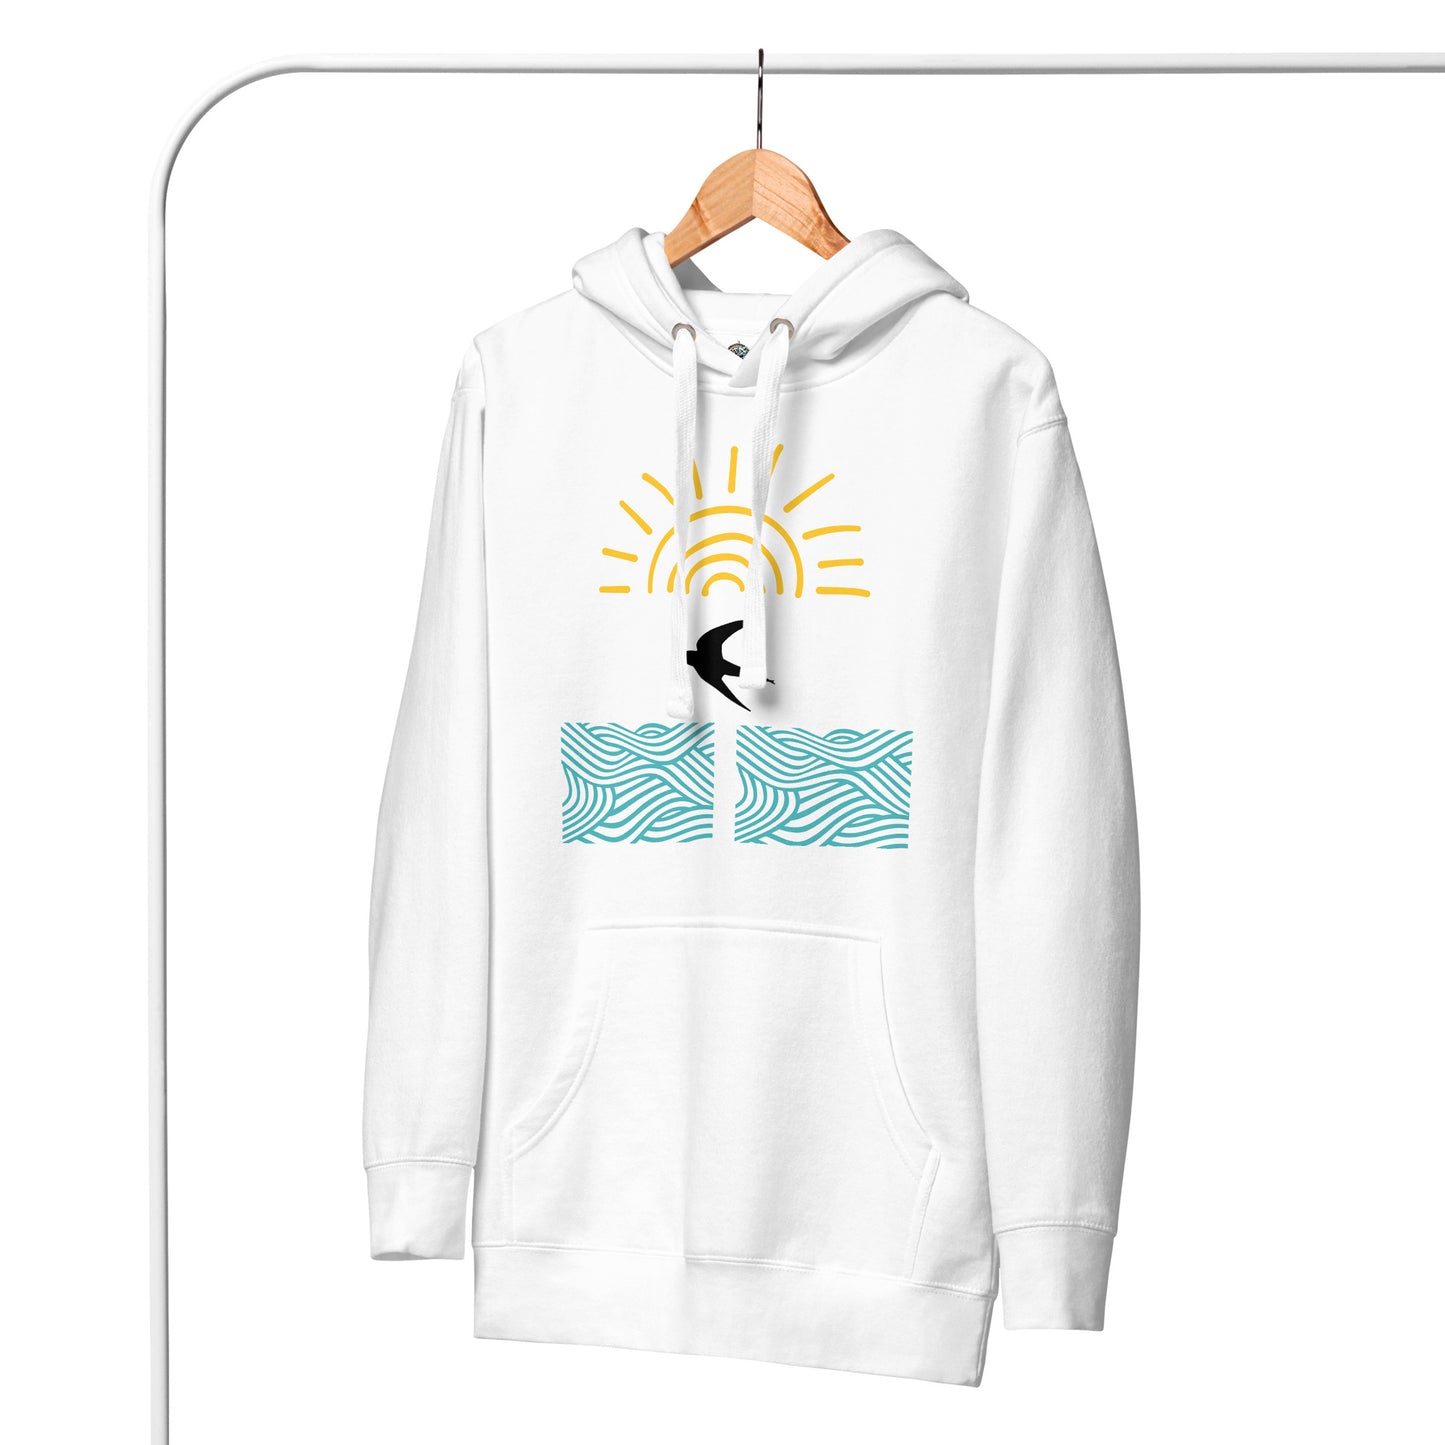 Bright Sunshine Hoodie, Fly over the Ocean by Our BoatyVerse